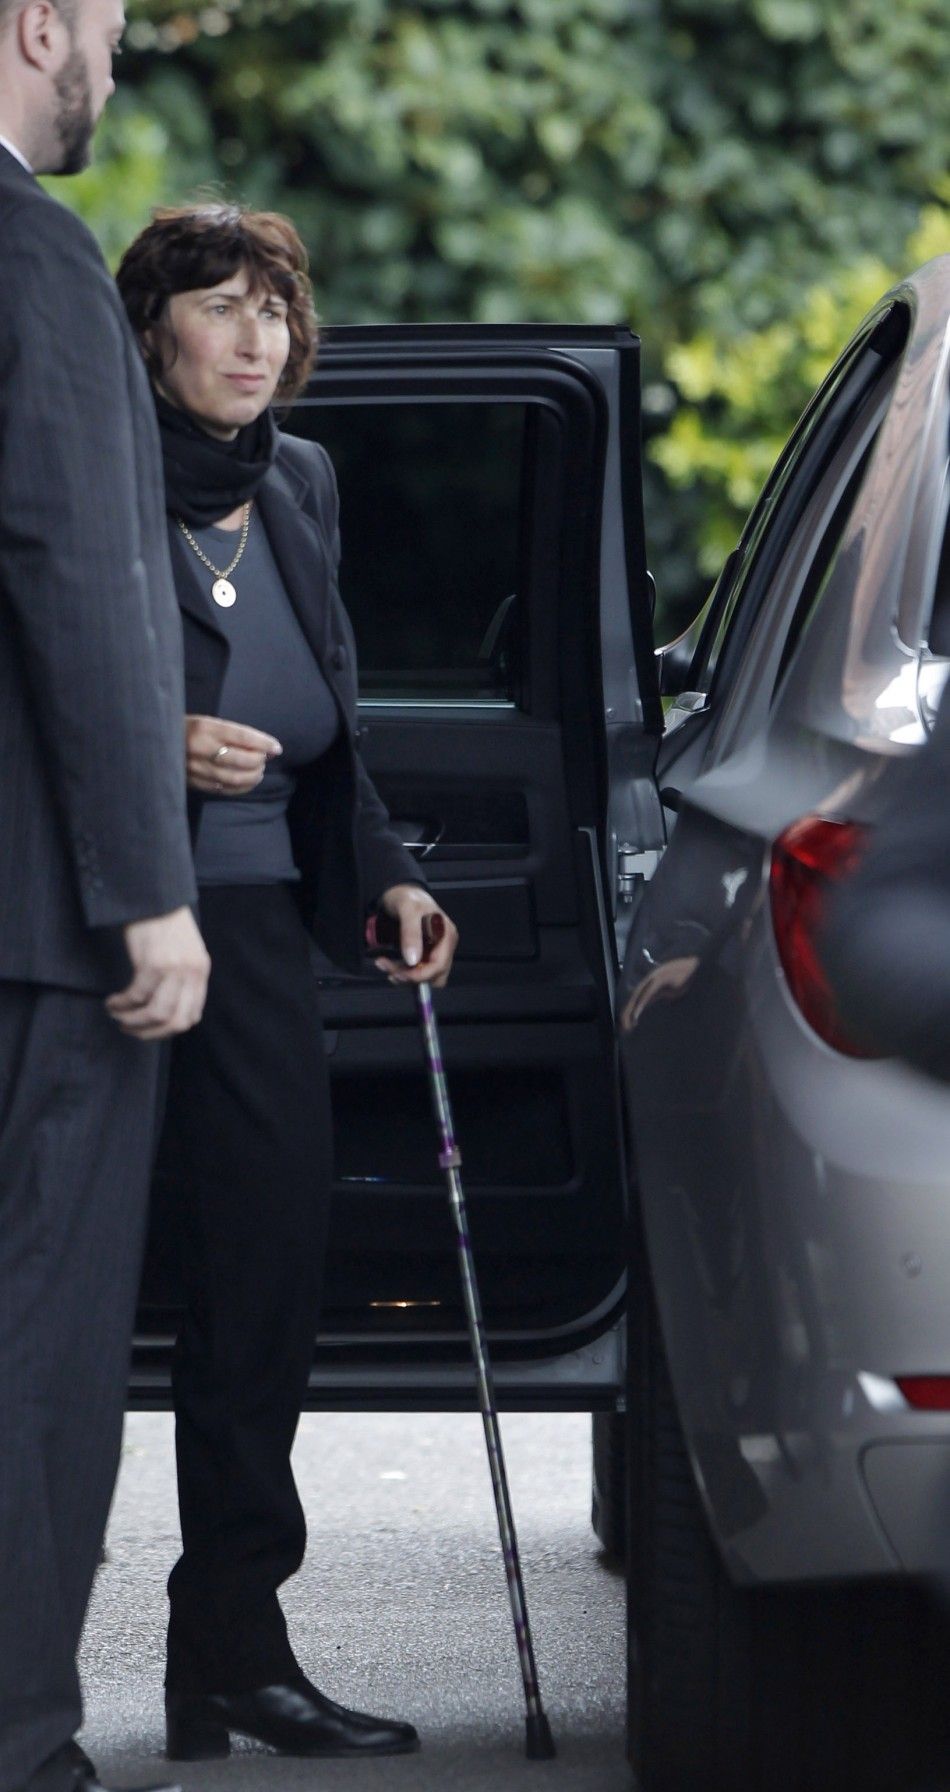 Janis Winehouse, the mother of deceased British singer Amy Winehouse, arrives at Golders Green Crematorium in London 